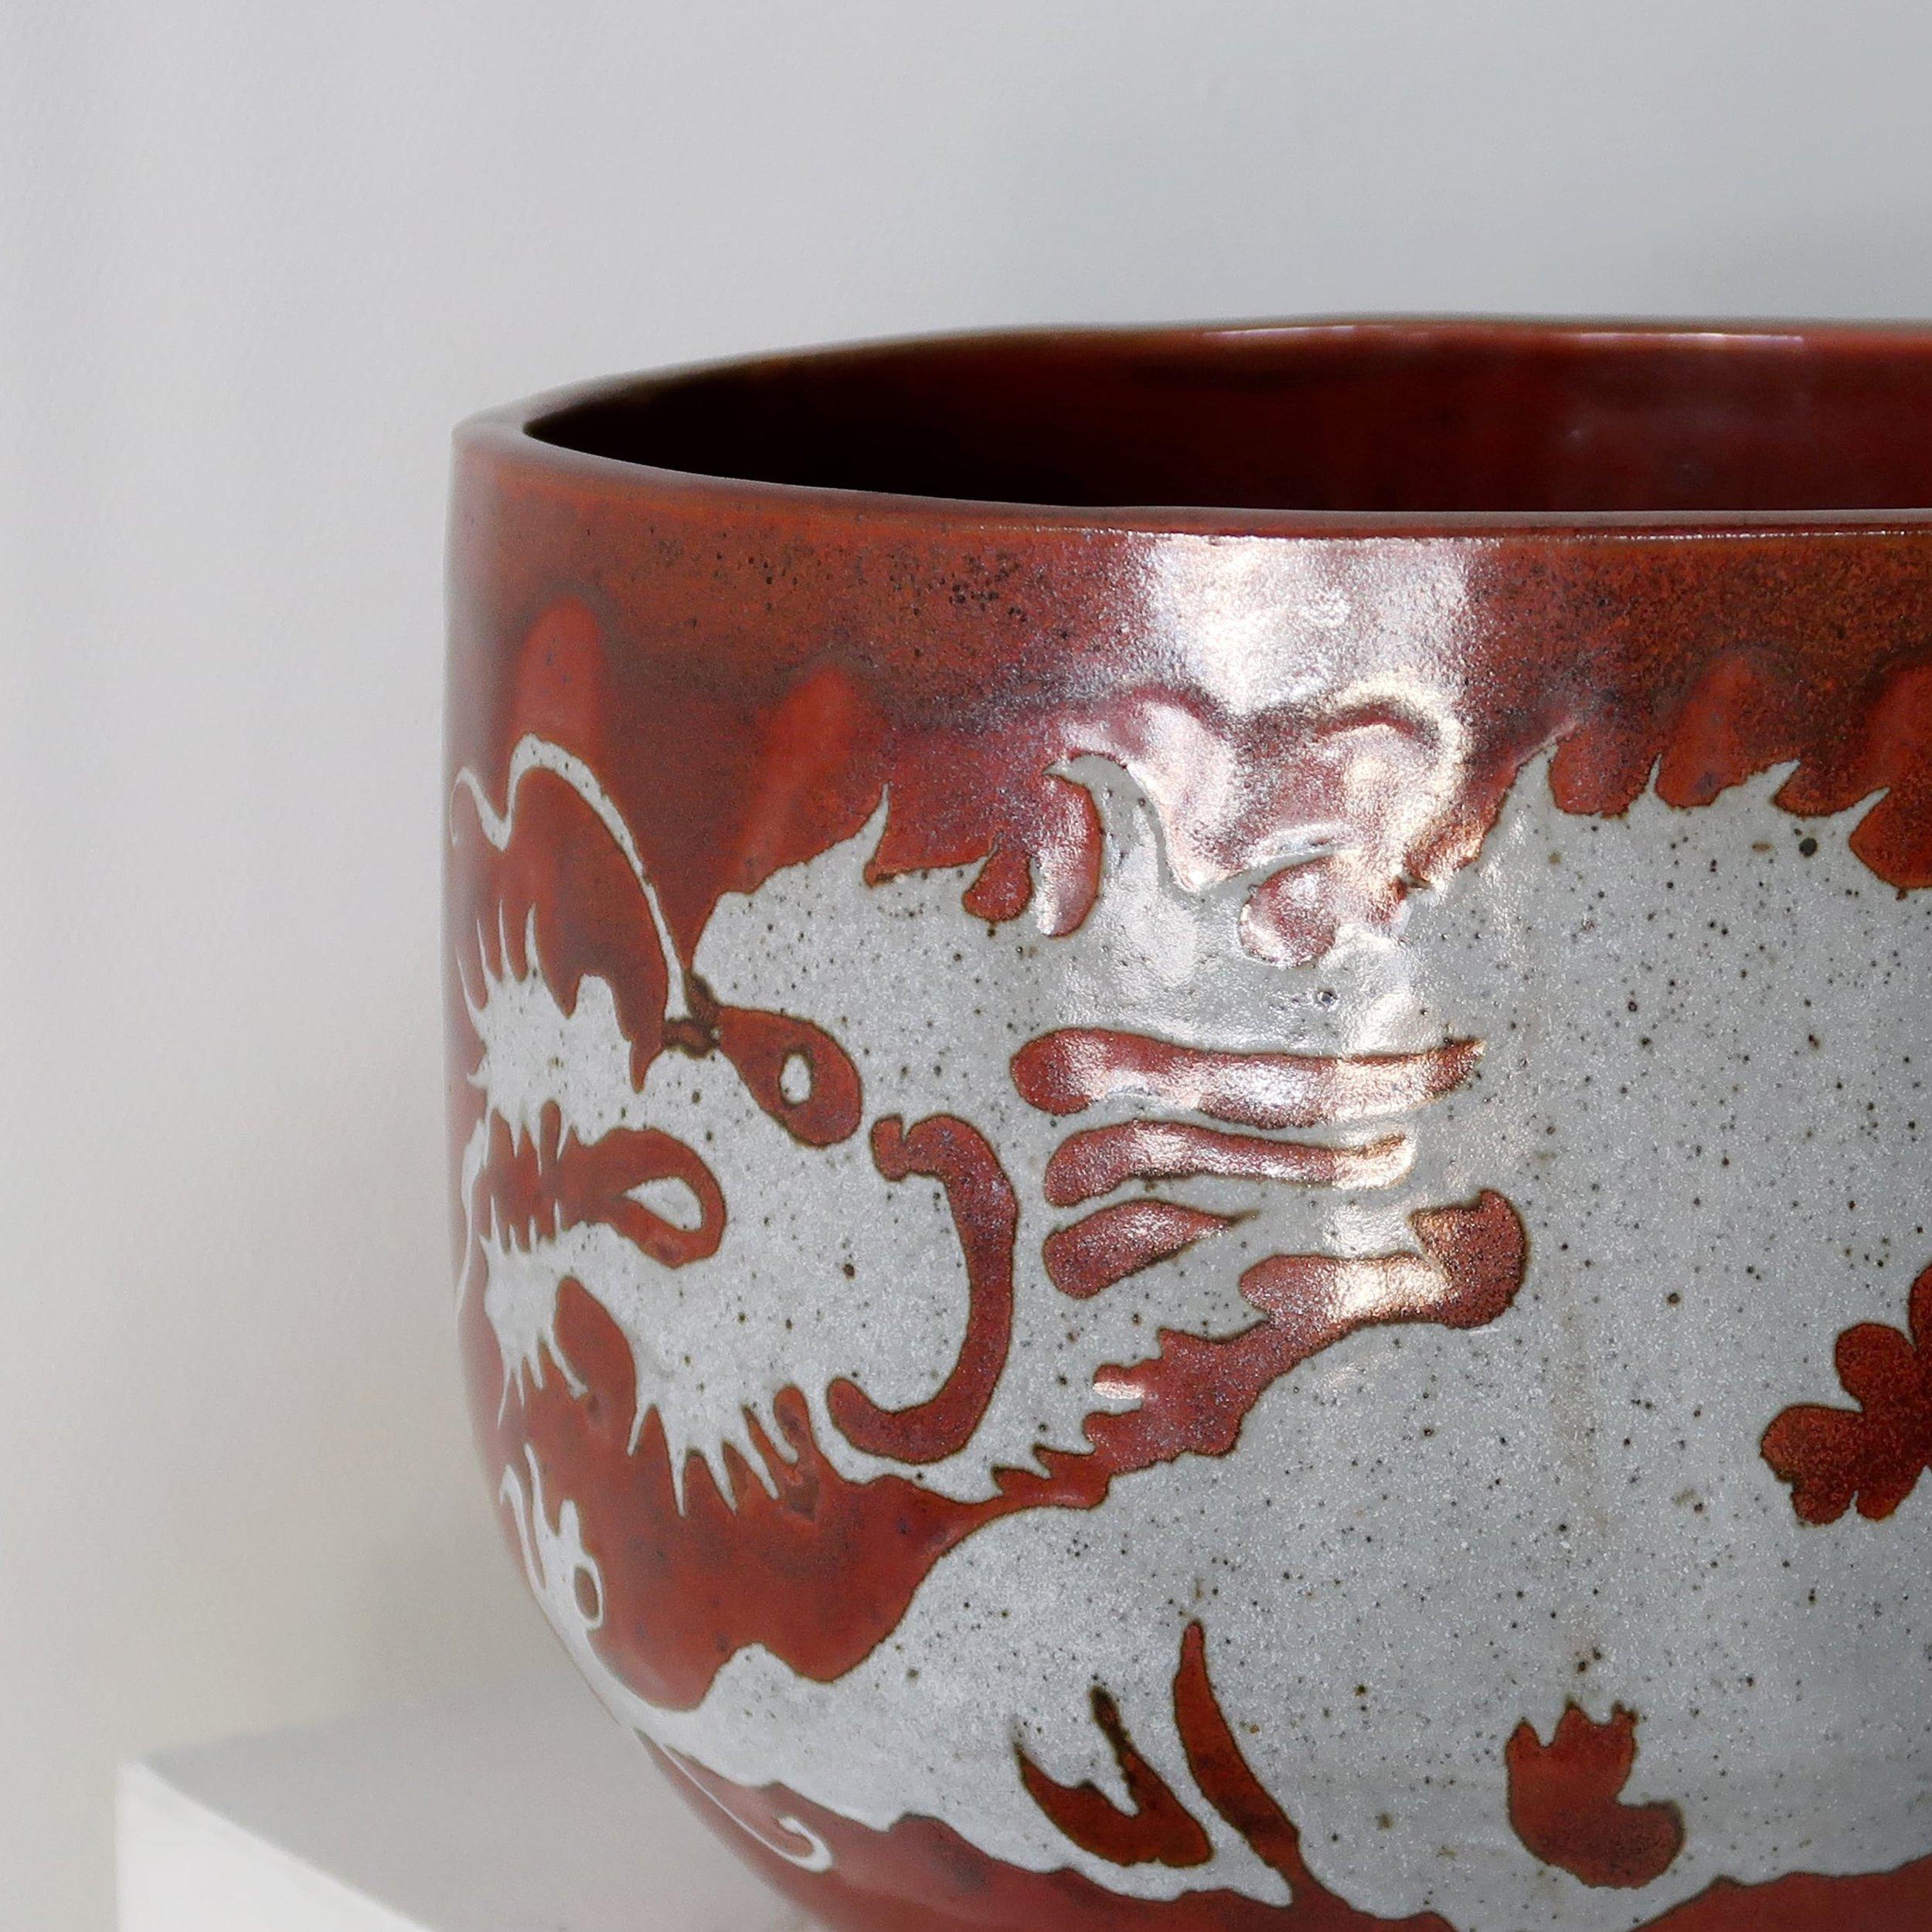 Asian style ceramic pot by Gay Schempp in striking maroon and adorned with intricate gray Asian characters. This unique piece combines artistry and functionality. (Signed)

This pottery piece does not come with a drain hole.

Measures 11.5